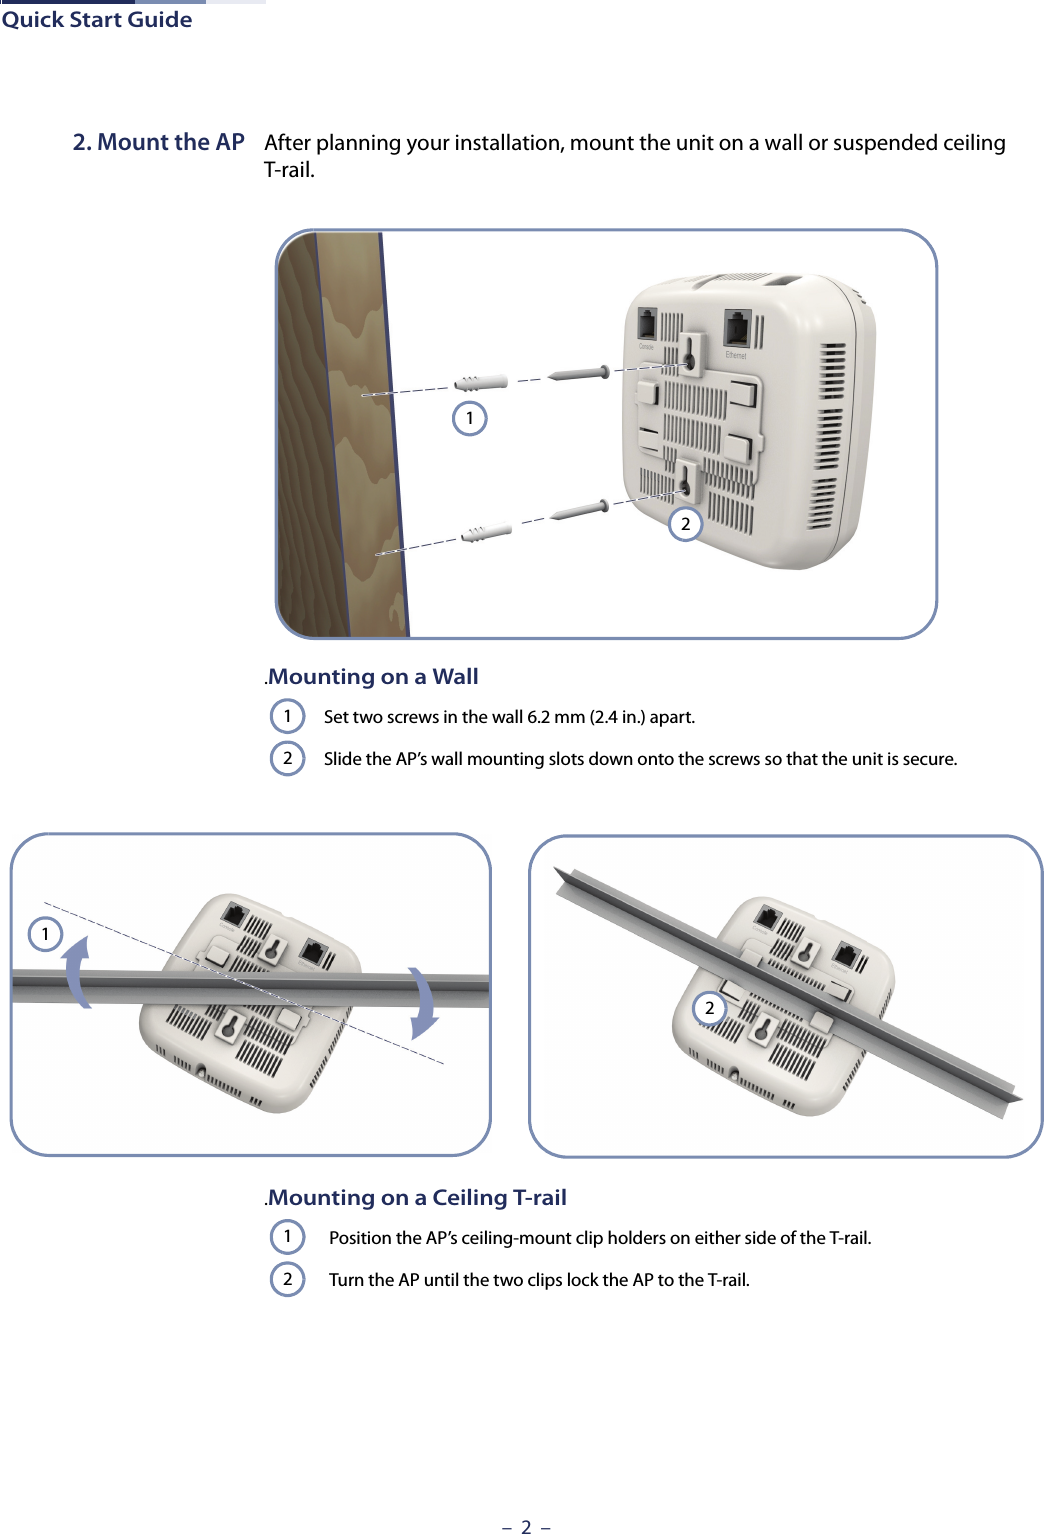 Quick Start Guide–  2  –2. Mount the AP After planning your installation, mount the unit on a wall or suspended ceiling T-rail. .Mounting on a WallSet two screws in the wall 6.2 mm (2.4 in.) apart.Slide the AP’s wall mounting slots down onto the screws so that the unit is secure.121212.Mounting on a Ceiling T-railPosition the AP’s ceiling-mount clip holders on either side of the T-rail.Turn the AP until the two clips lock the AP to the T-rail.12